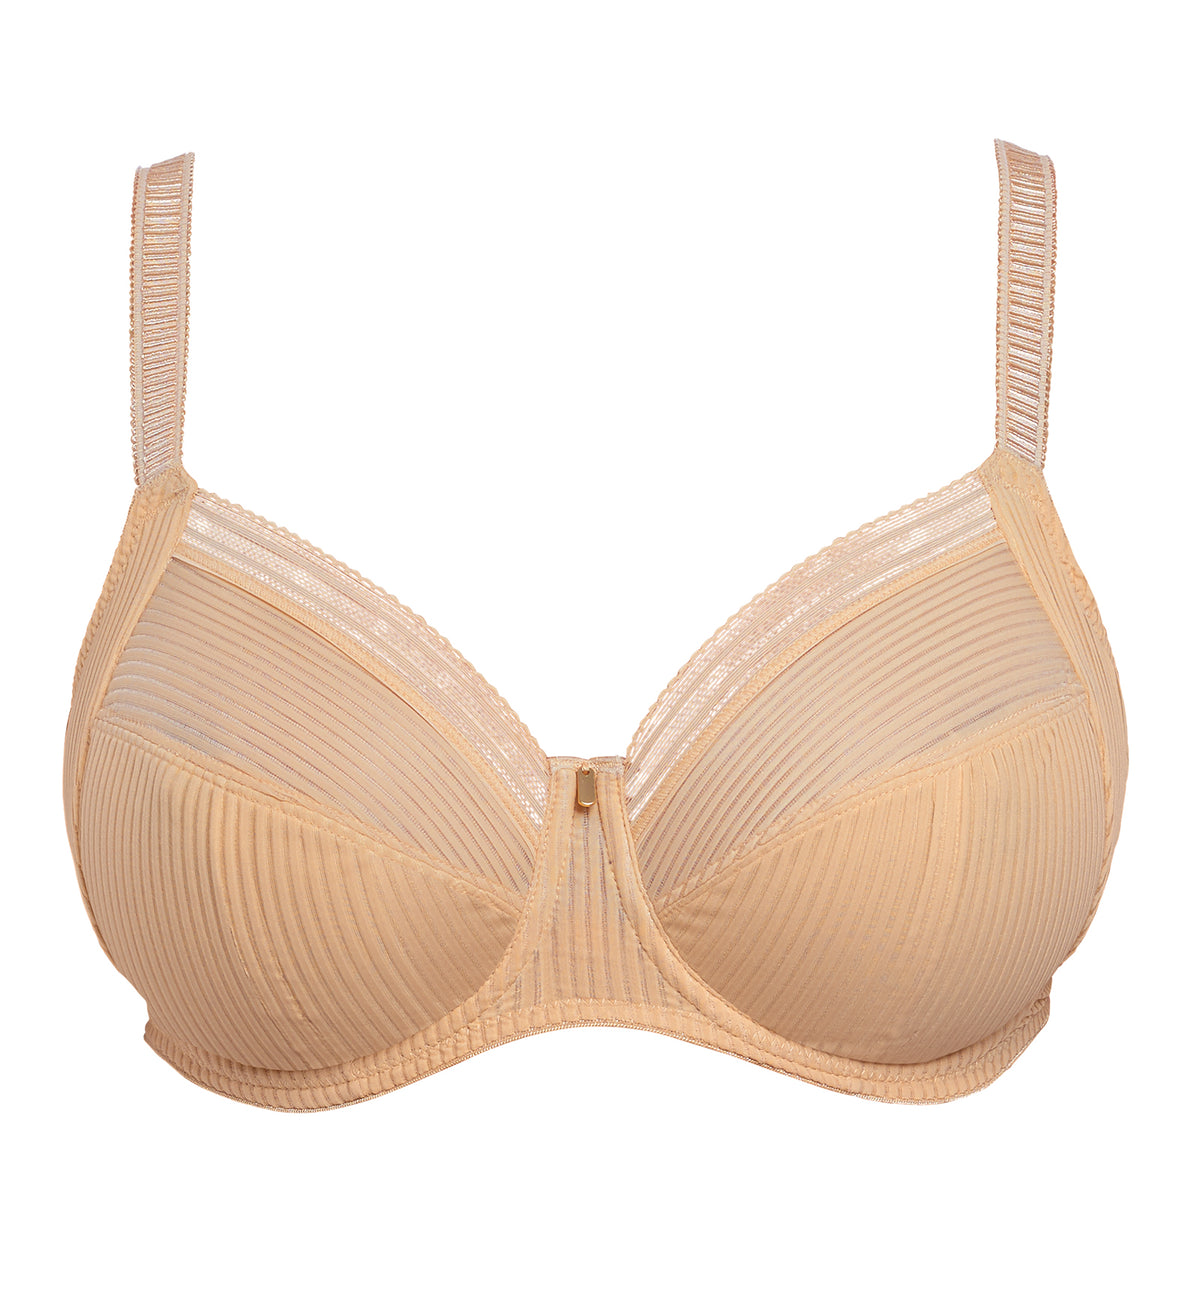 Fantasie Fusion Full Cup Side Support Underwire Bra (3091)- Sand